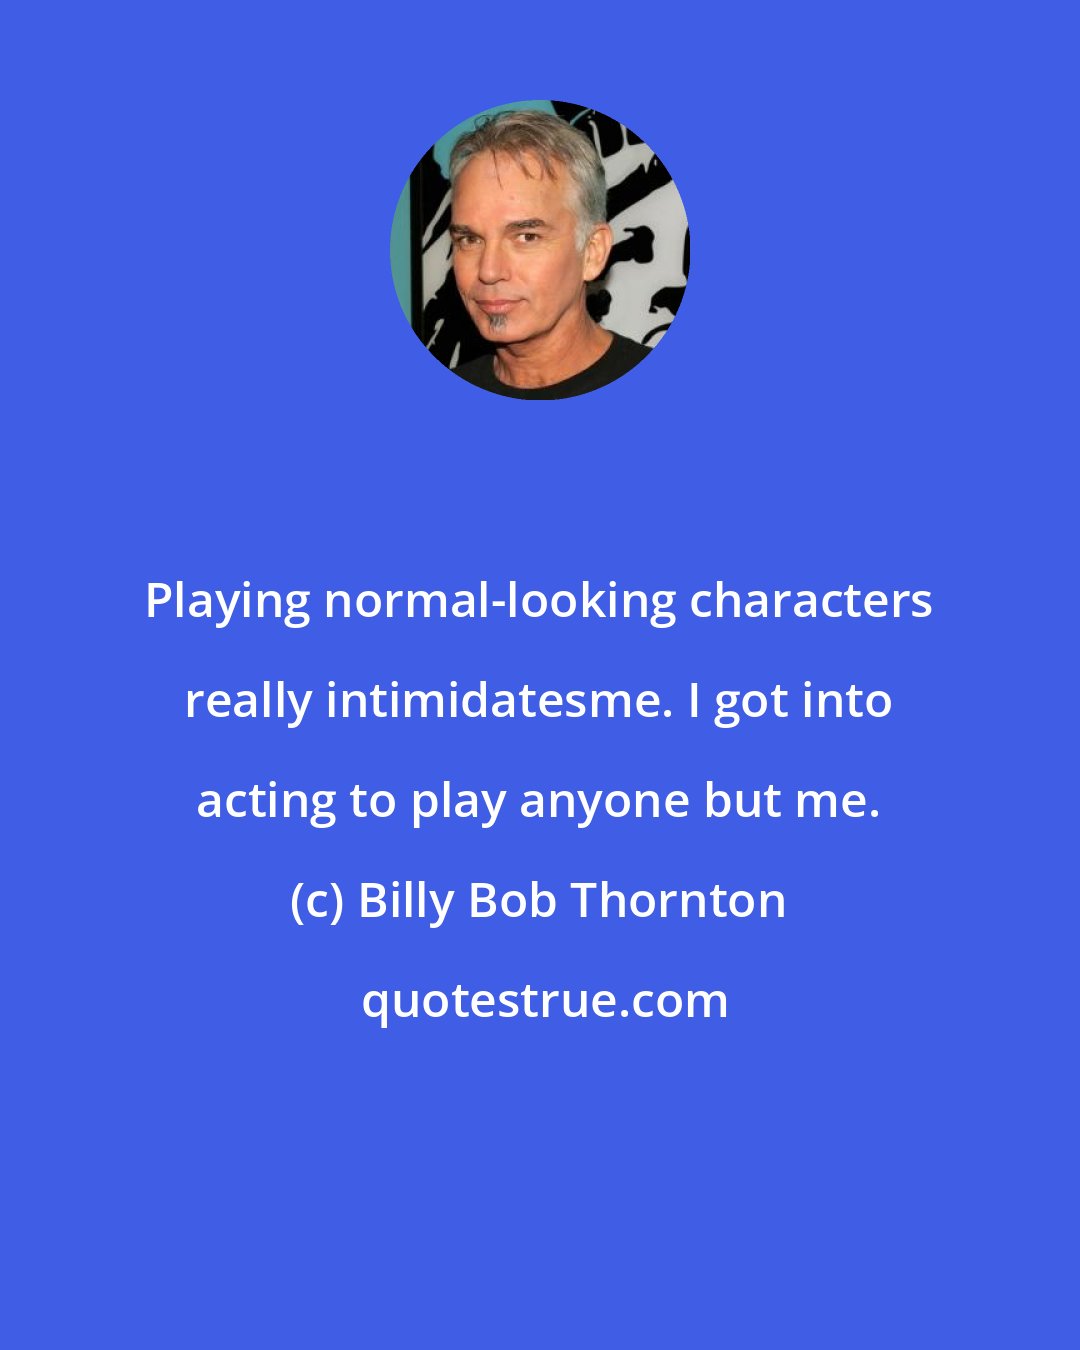 Billy Bob Thornton: Playing normal-looking characters really intimidatesme. I got into acting to play anyone but me.